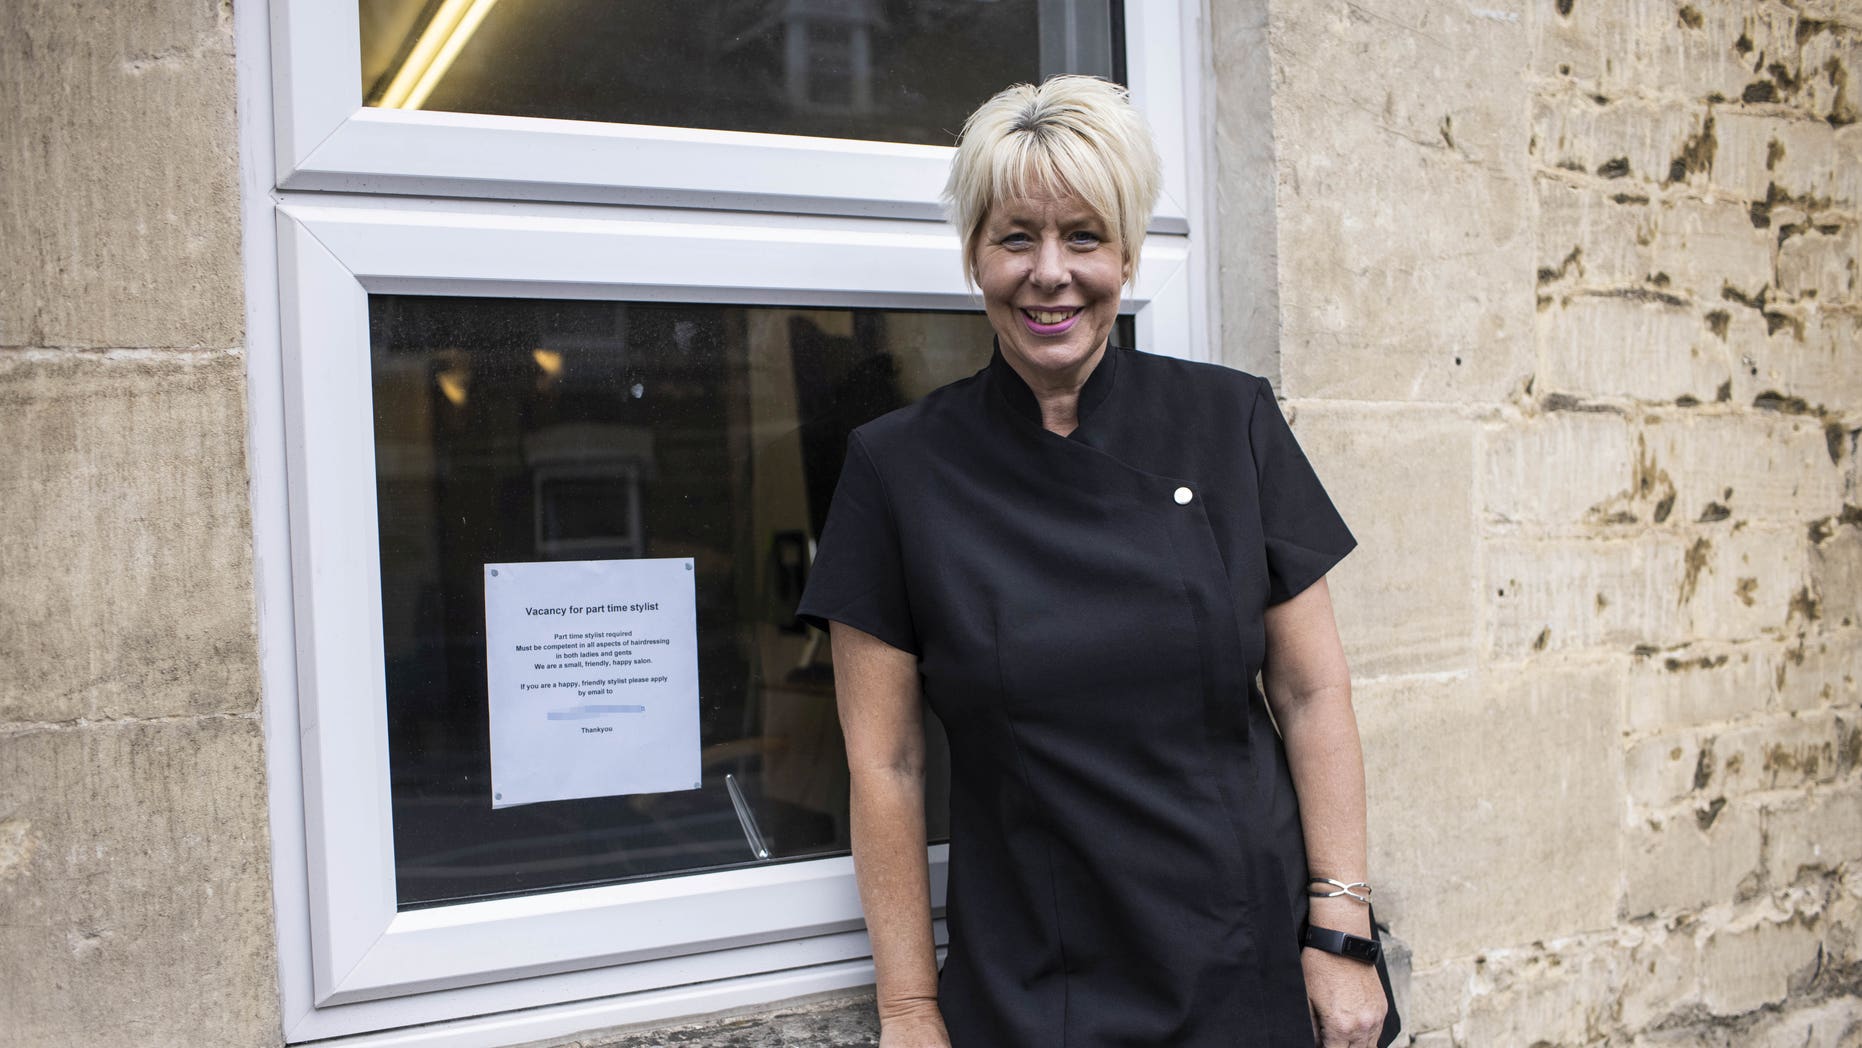 Alison Birch listed a job ad looking for a part-time qualified hairdresser at her AJ's Unisex Hair Salon in Stroud, Gloucestershire.